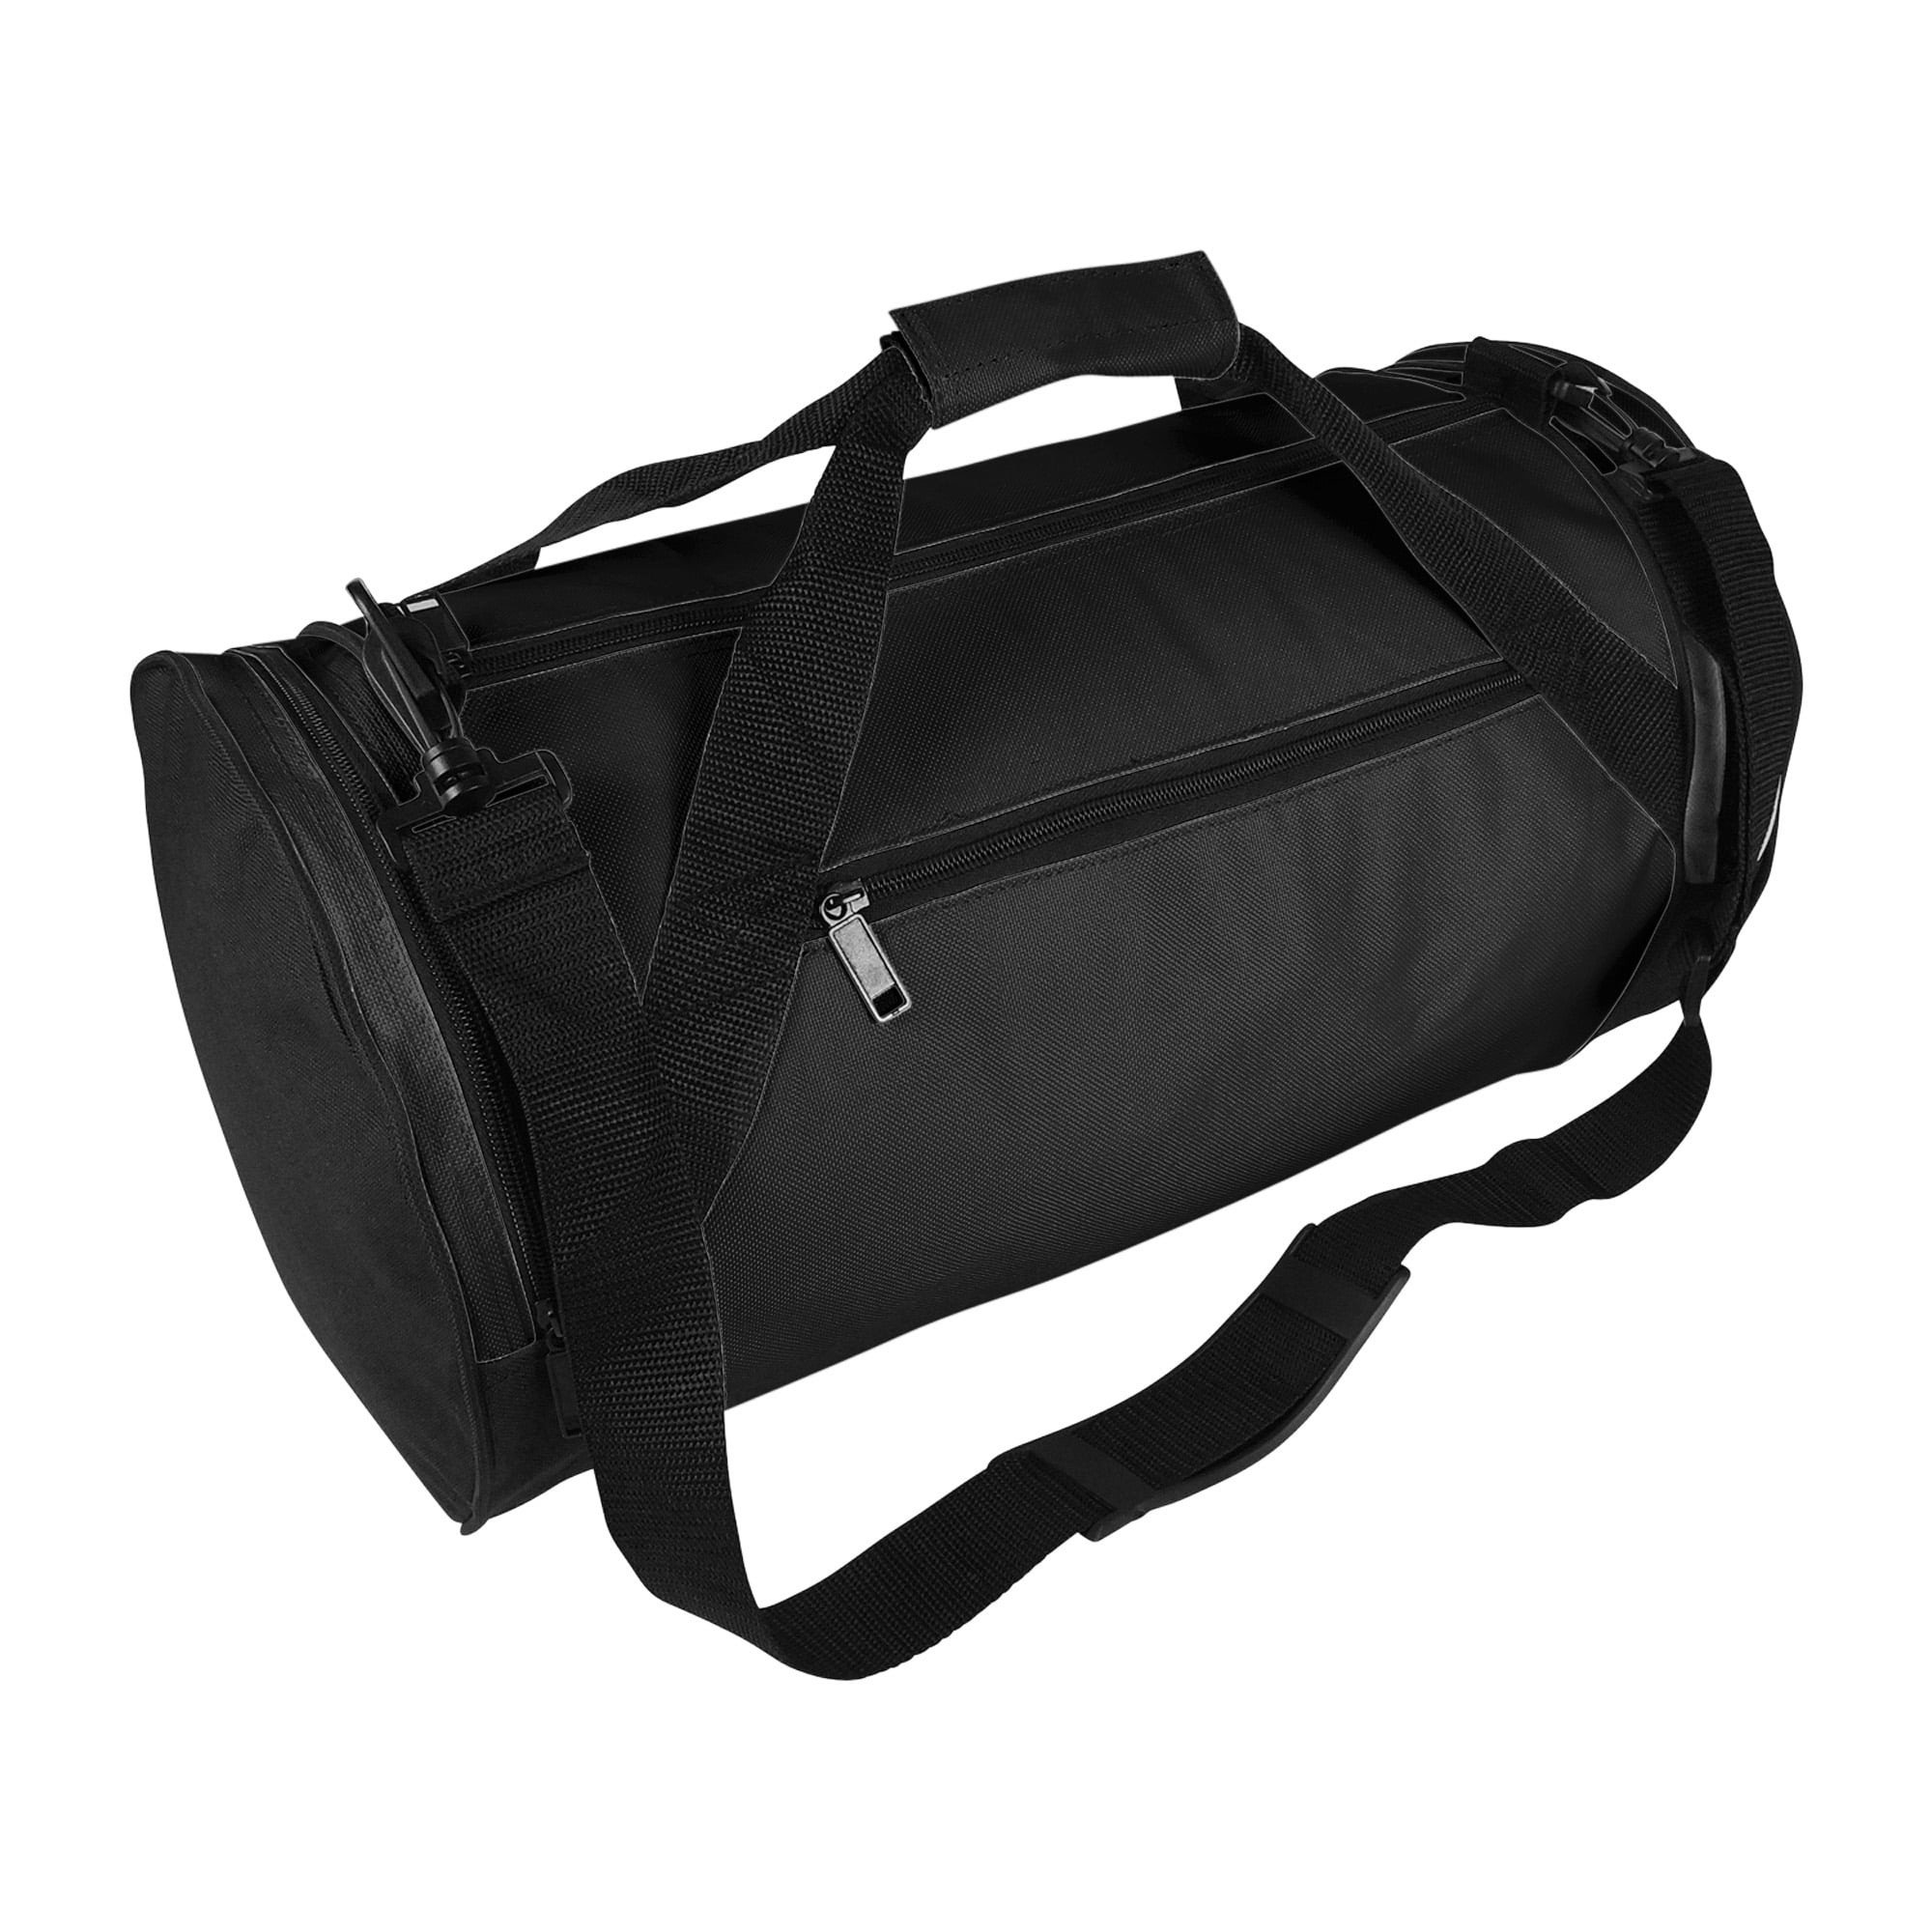 DALIX 18&quot; Round Duffle Bag Flexible Roll Gym Traveling Bag in Black - www.waterandnature.org